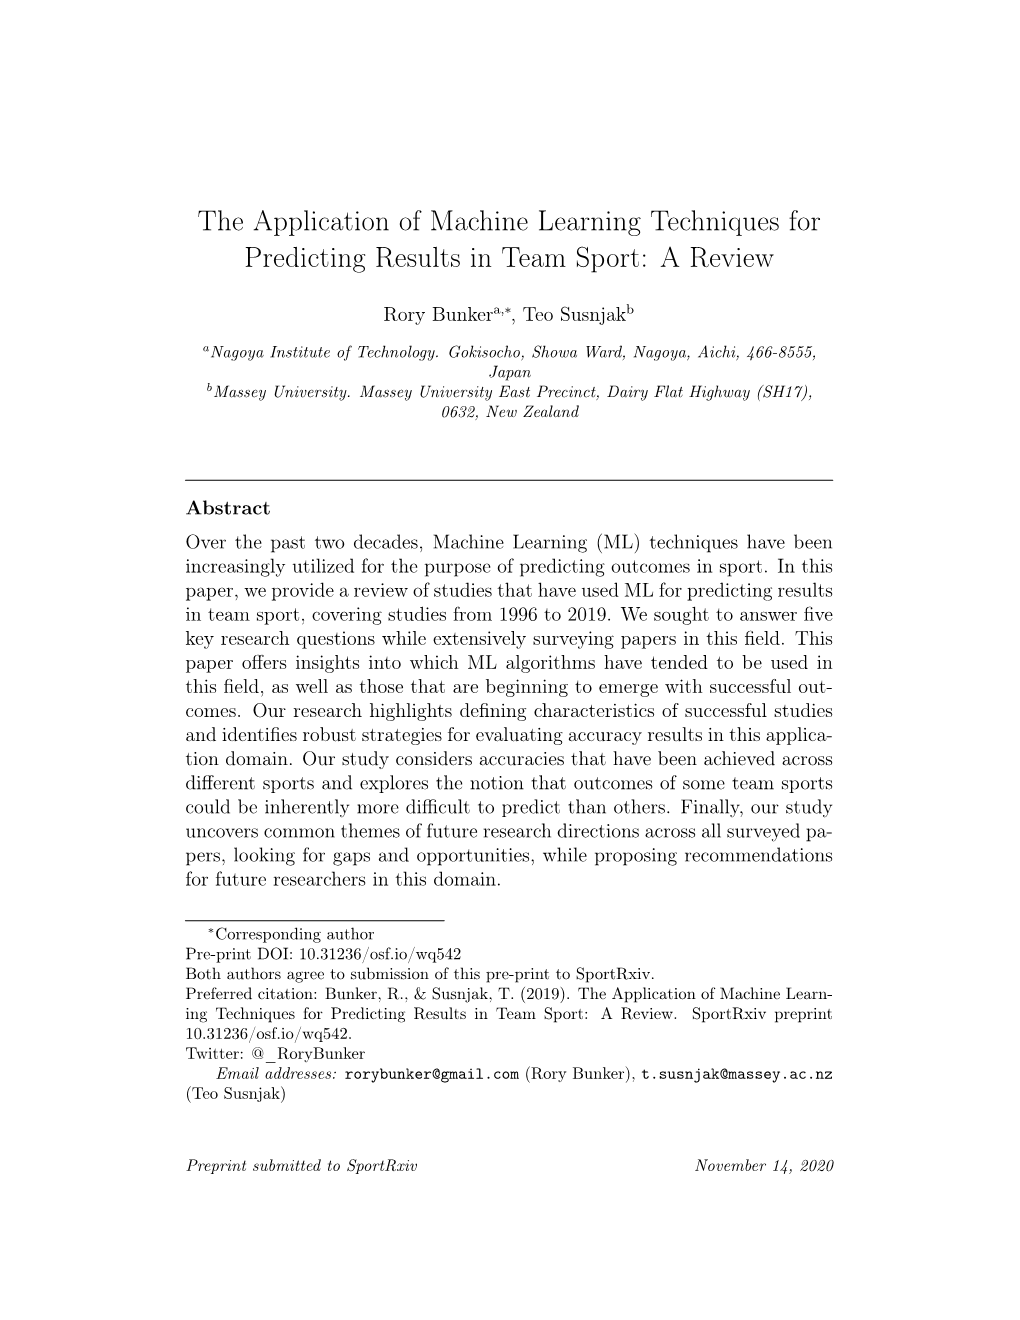 The Application of Machine Learning Techniques for Predicting Results in Team Sport: a Review